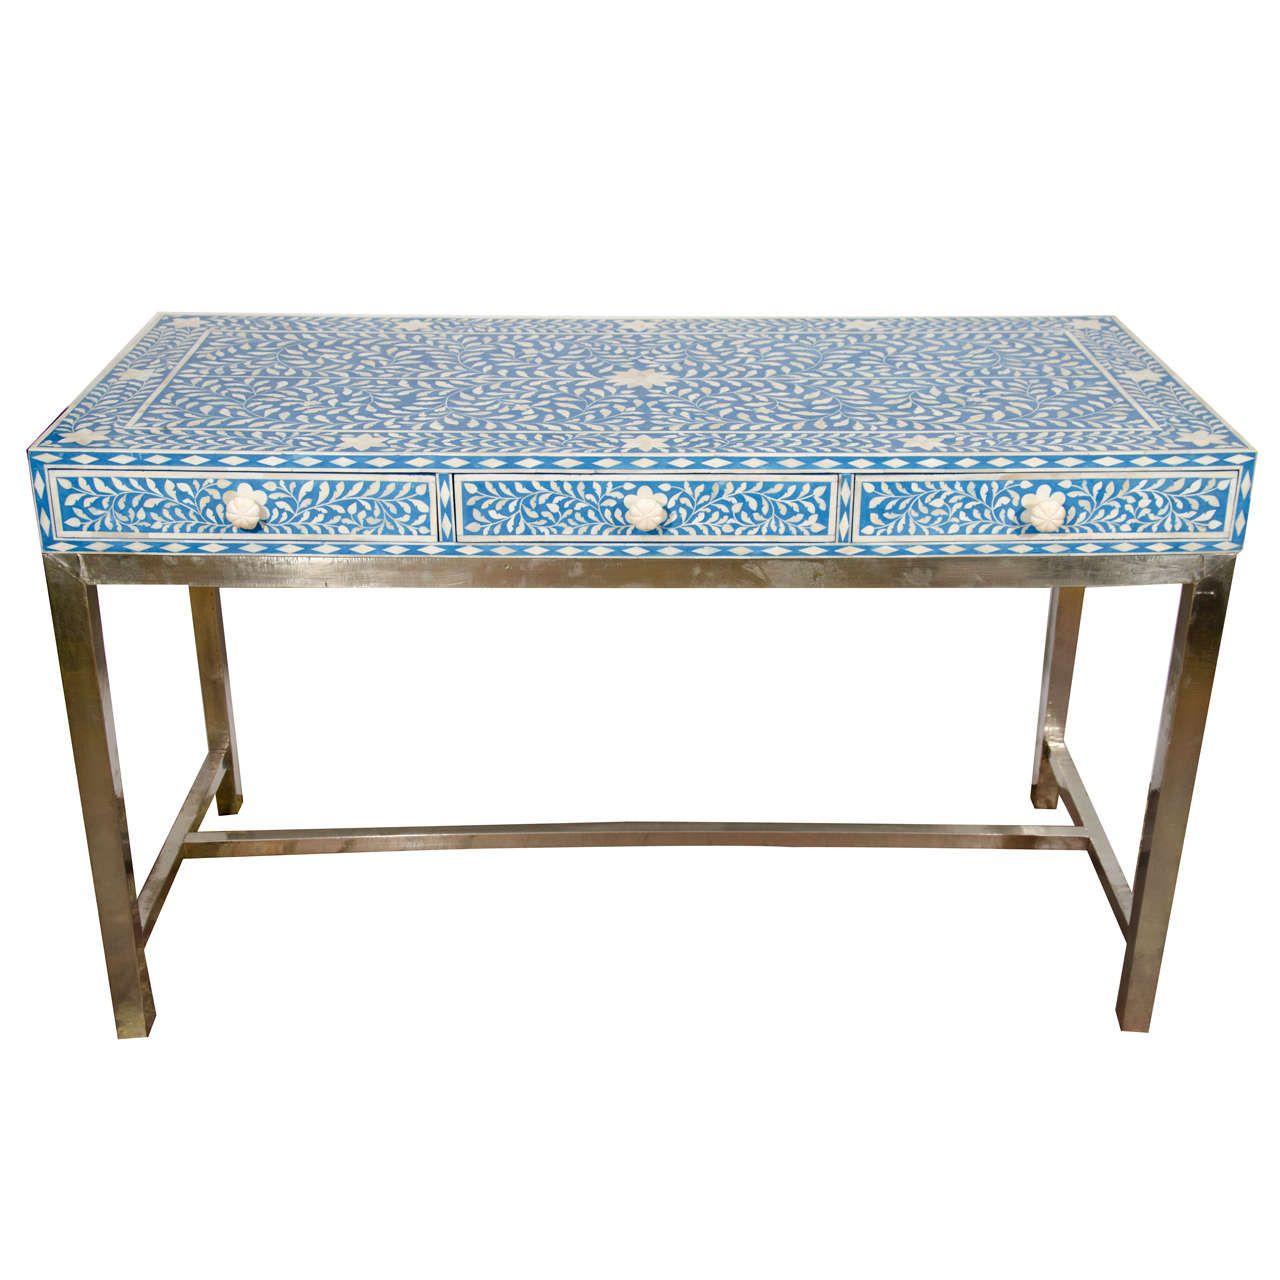 Indian Bone Inlay Blue And White Writing Desk With White Metal Base At Throughout Gold And Blue Writing Desks (View 11 of 15)